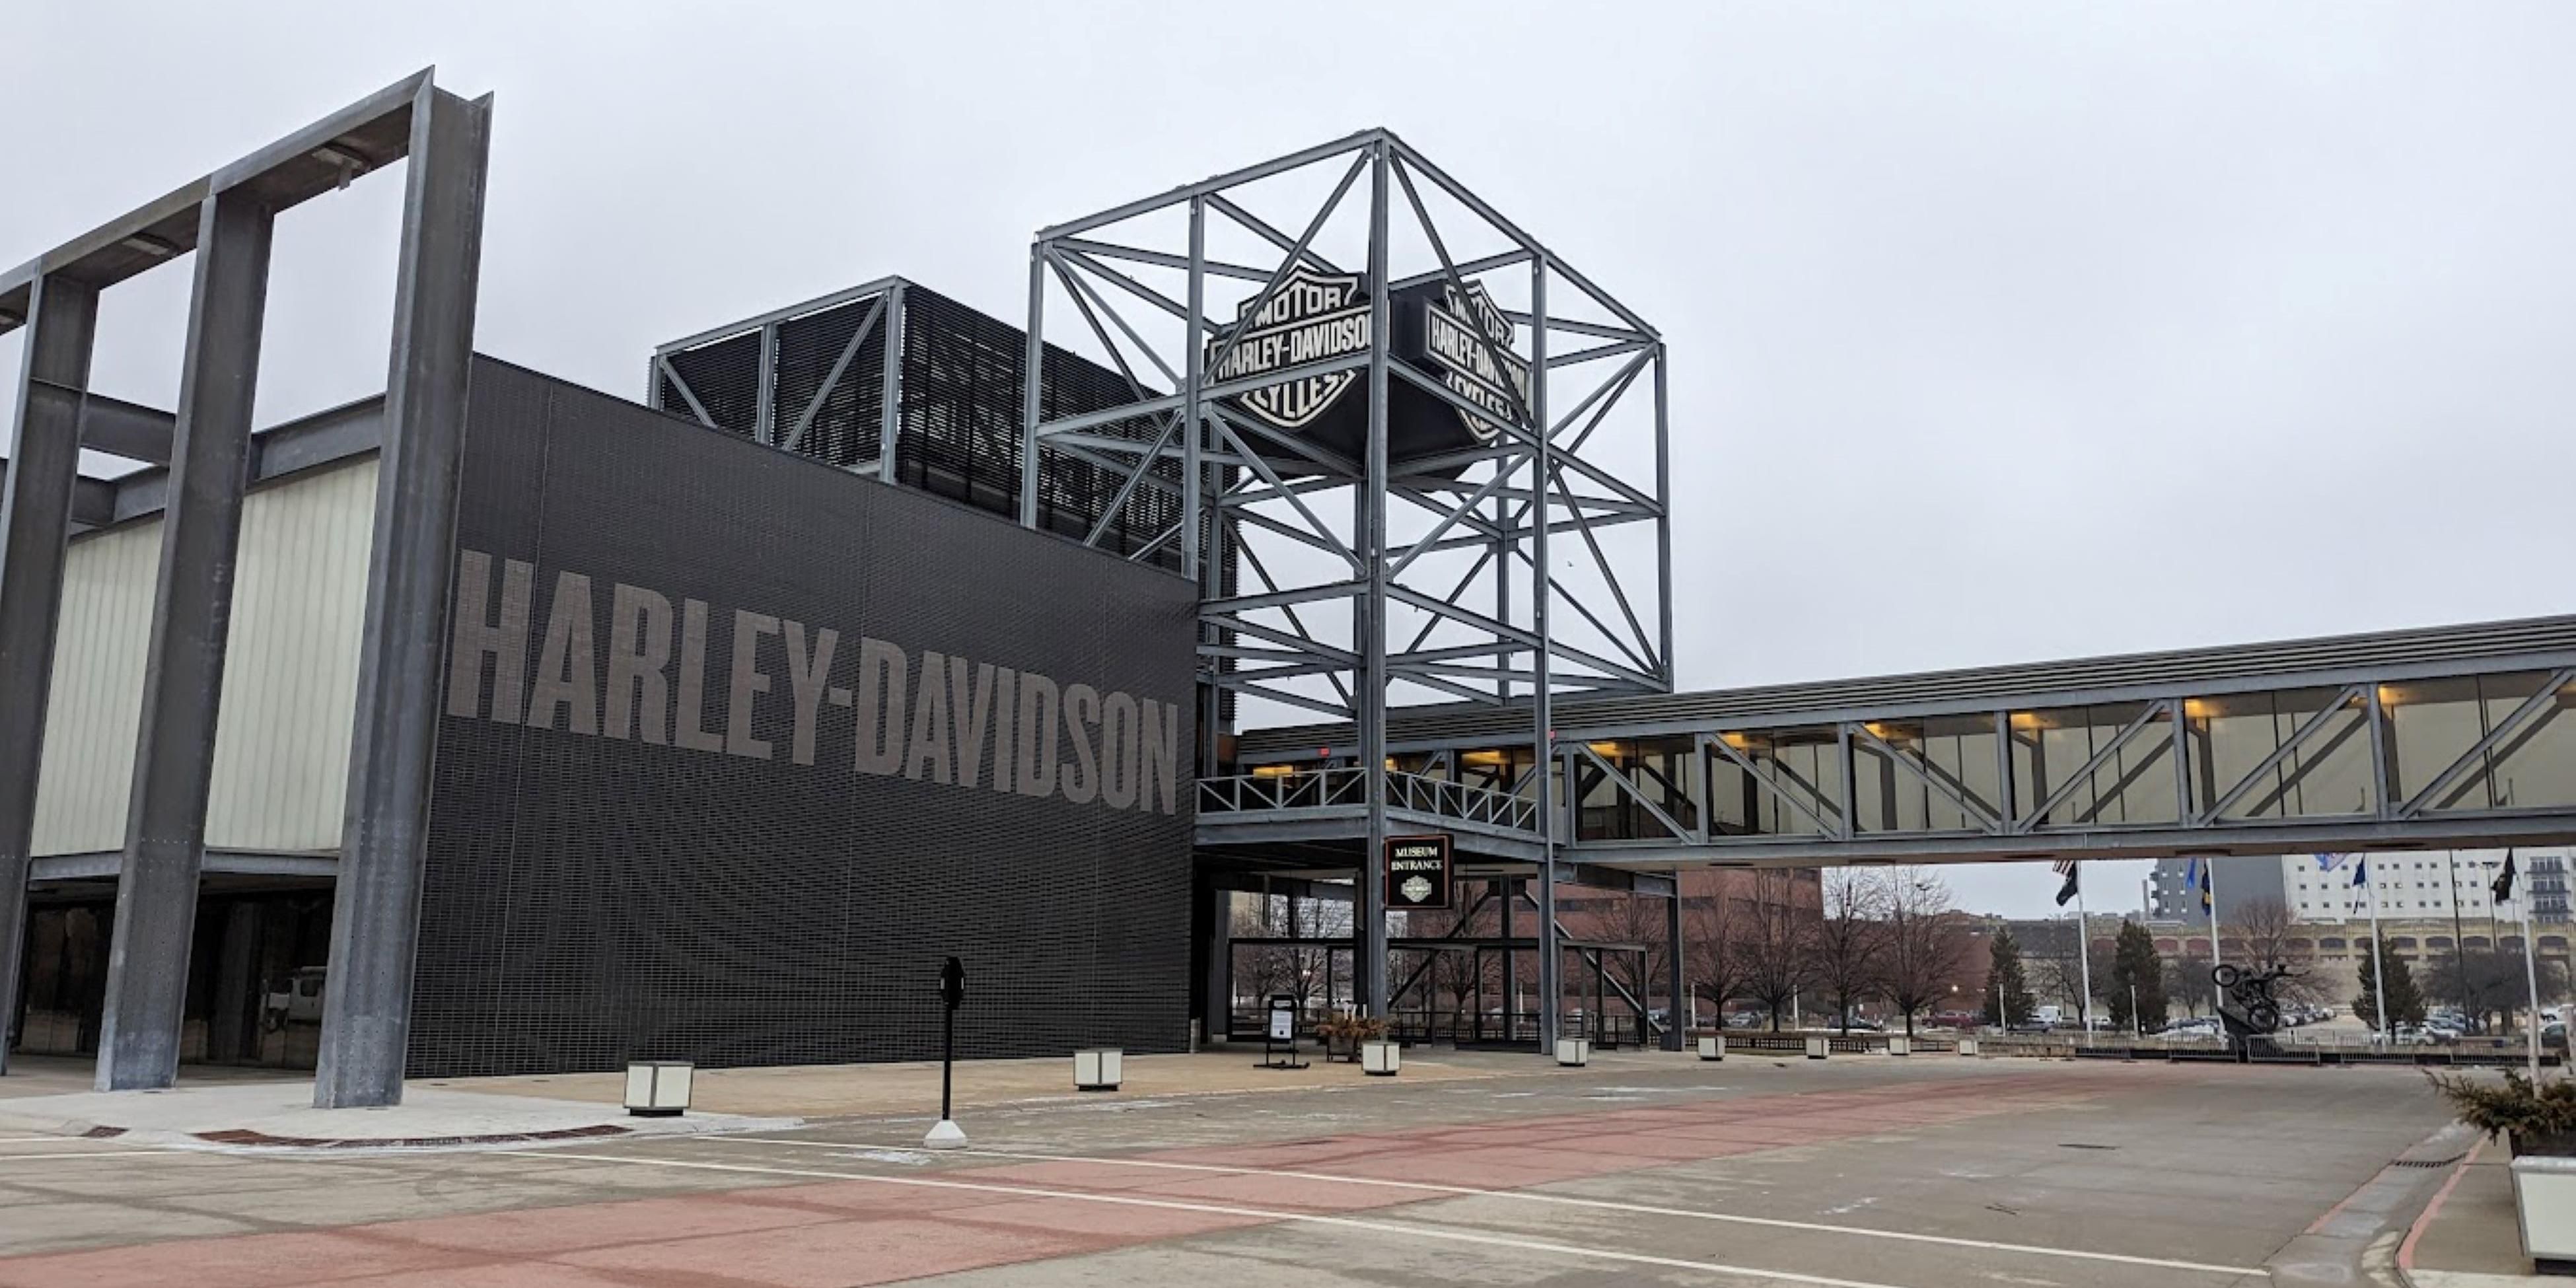 Within the walls of the Harley Davidson Museum you will find motorcycles and artifacts that tell the story of the Motor Company's rich history and heritage.